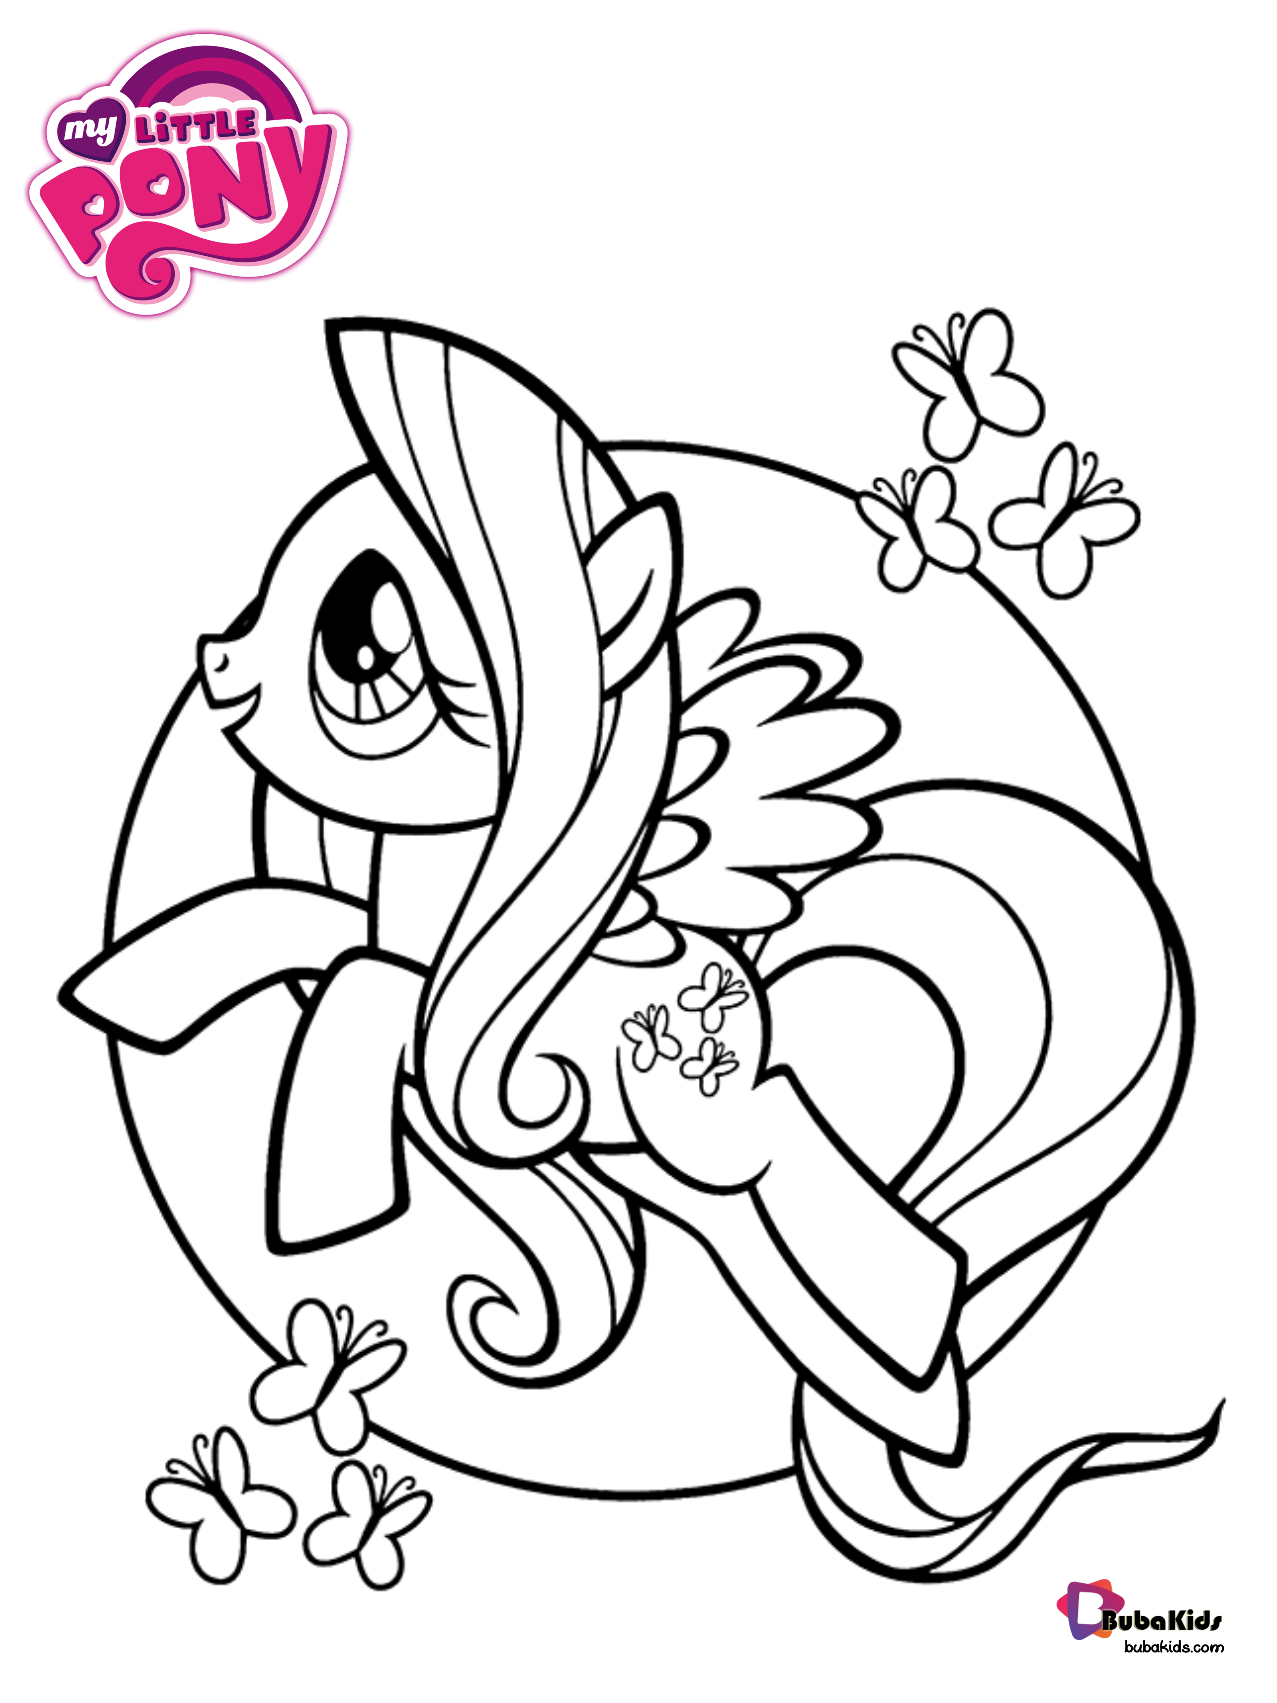 Butterflies and My Little Pony coloring page. Wallpaper